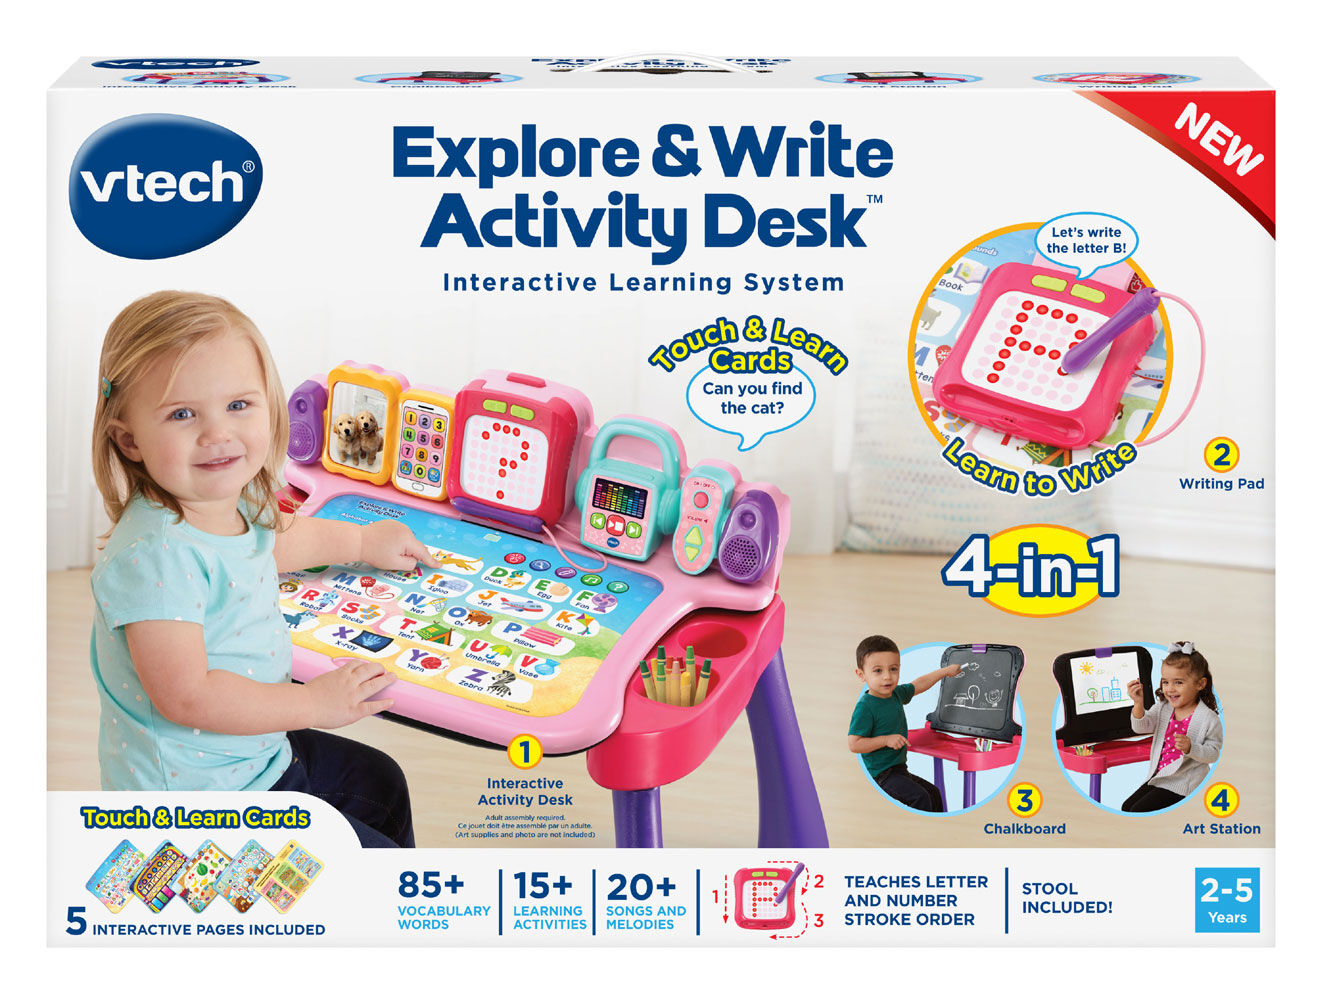 NEW VTech Explore and Write Activity Desk Transforms into Easel and Chalkboard 